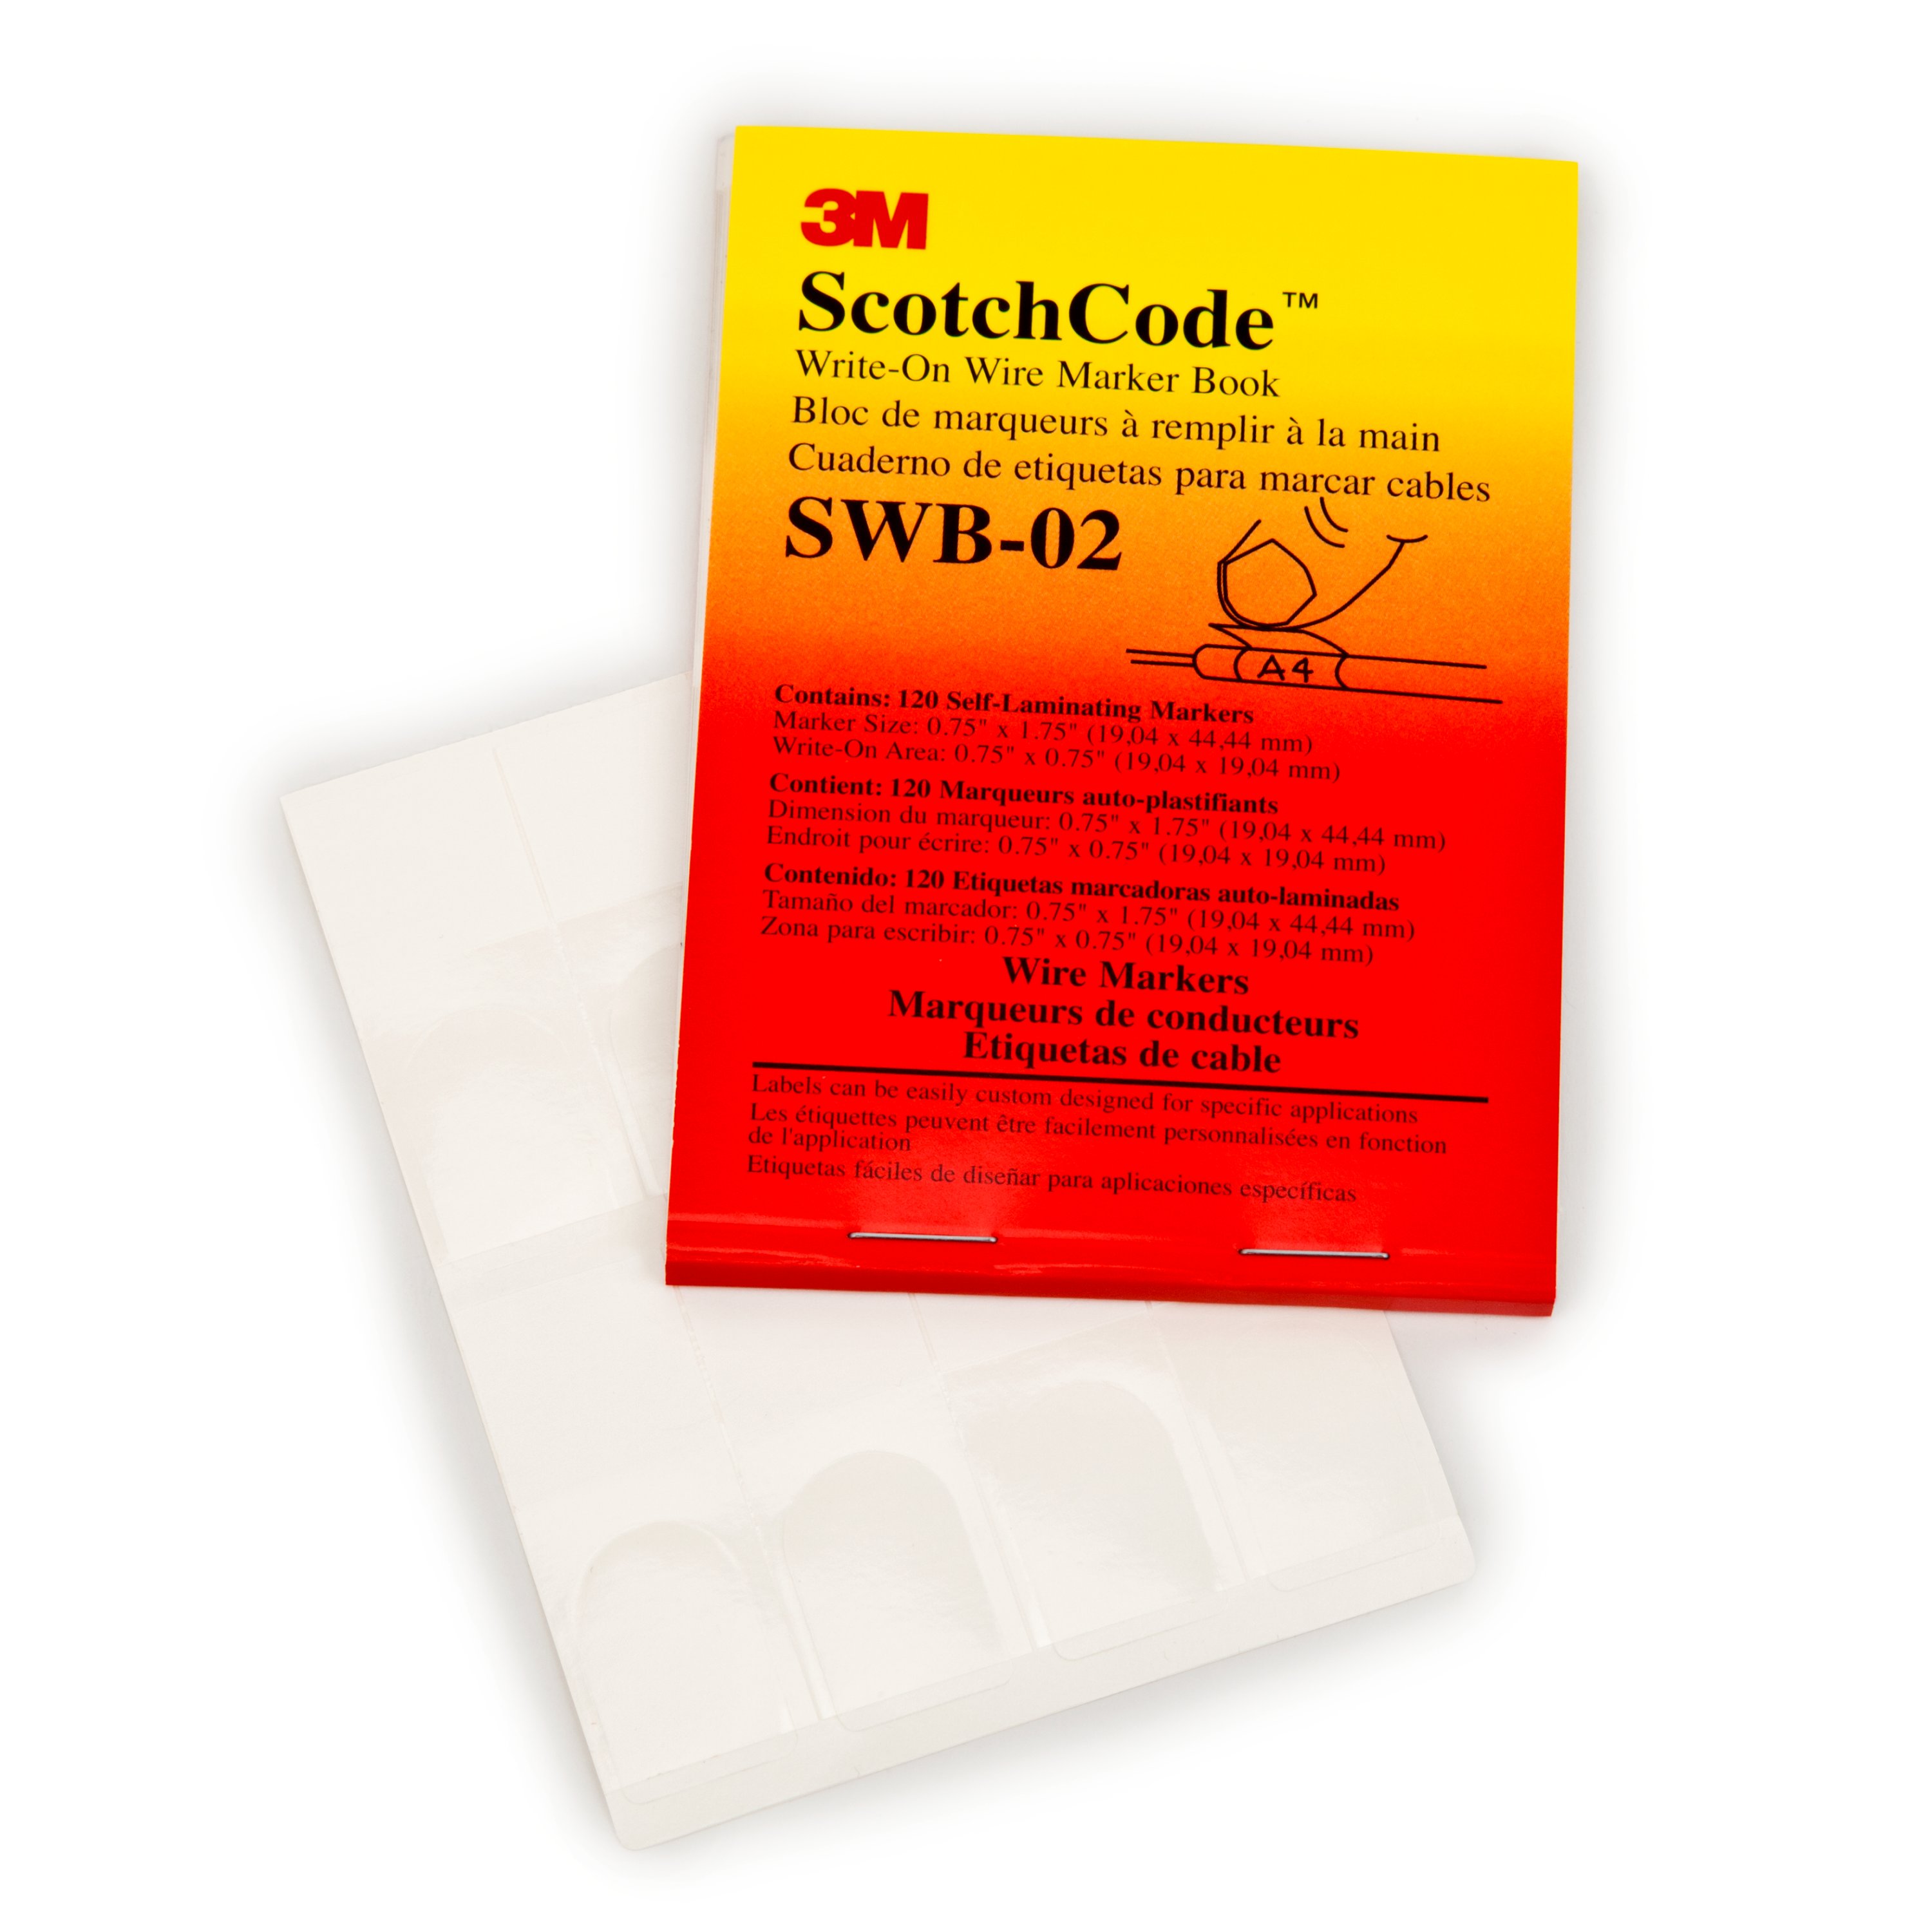 3M™ ScotchCode™ Write-On Wire Marker Books SWB contain self-laminating, write-on markers designed for small volume applications involving special or complex legends that are hand written at the job site.